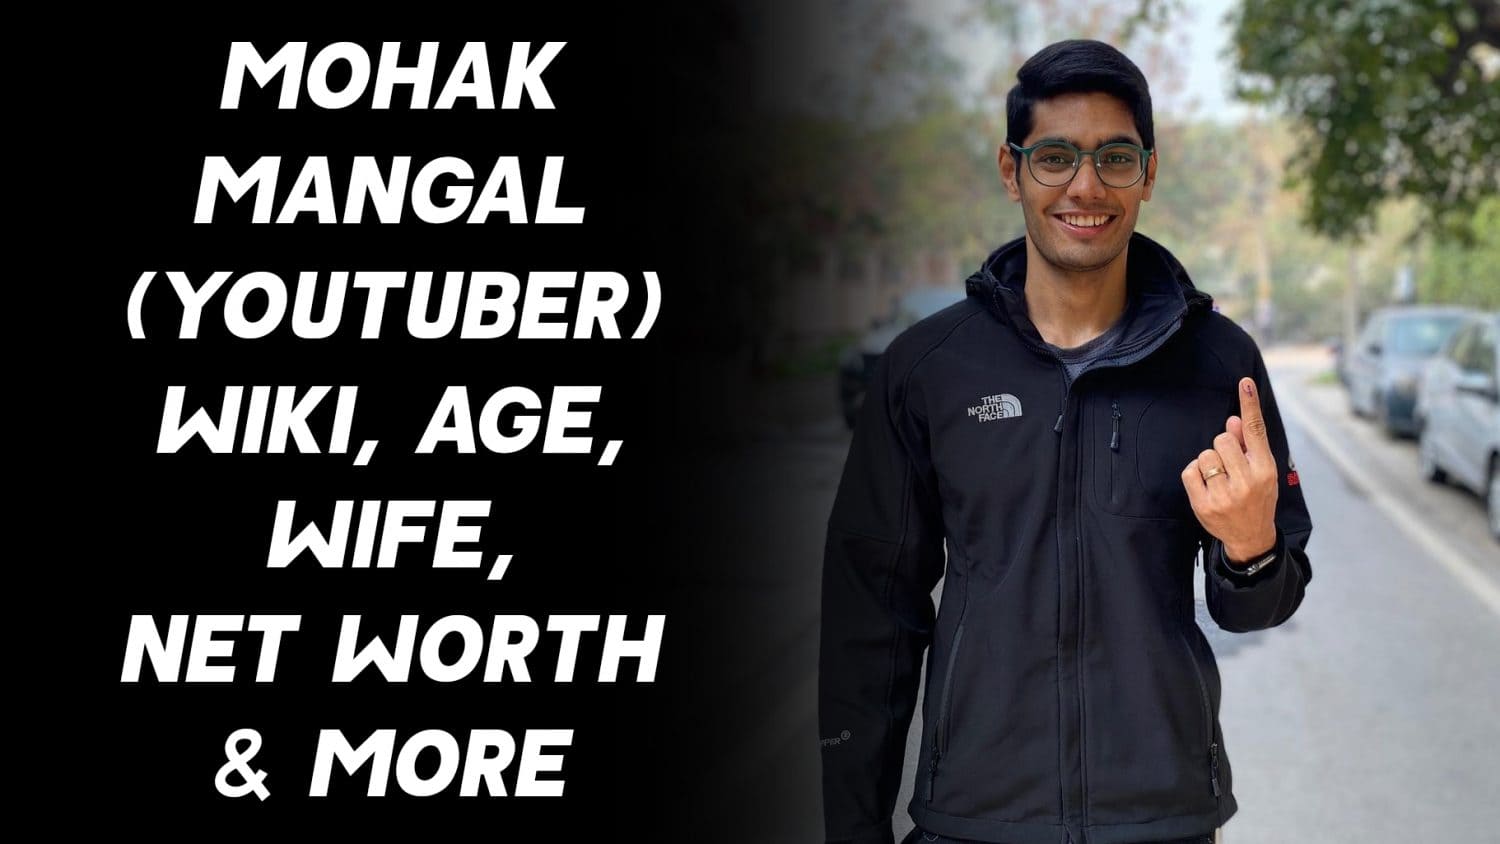 Mohak Mangal (YouTuber) Wiki, Age, Wife, Net Worth & More 1